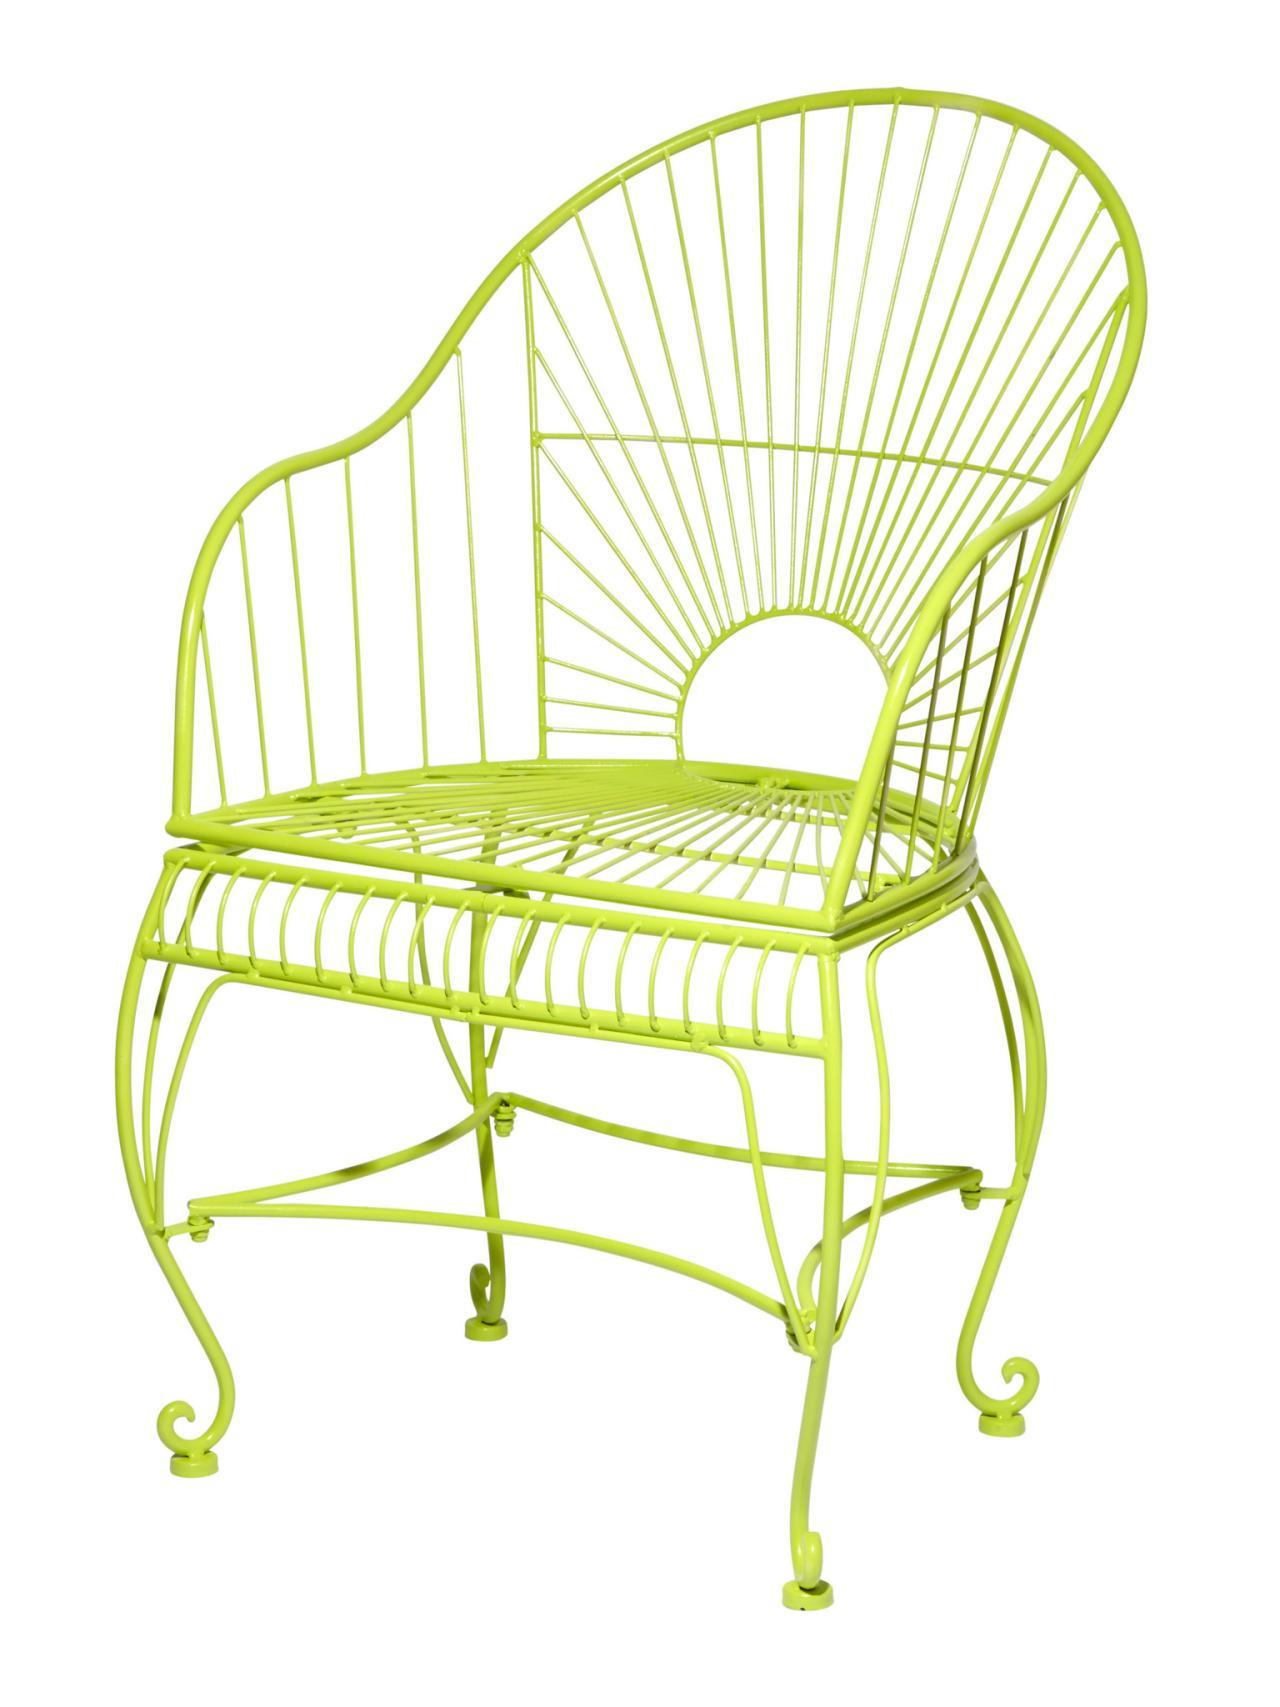 How To Paint Wrought Iron Furniture, What Paint To Use On Wrought Iron Furniture